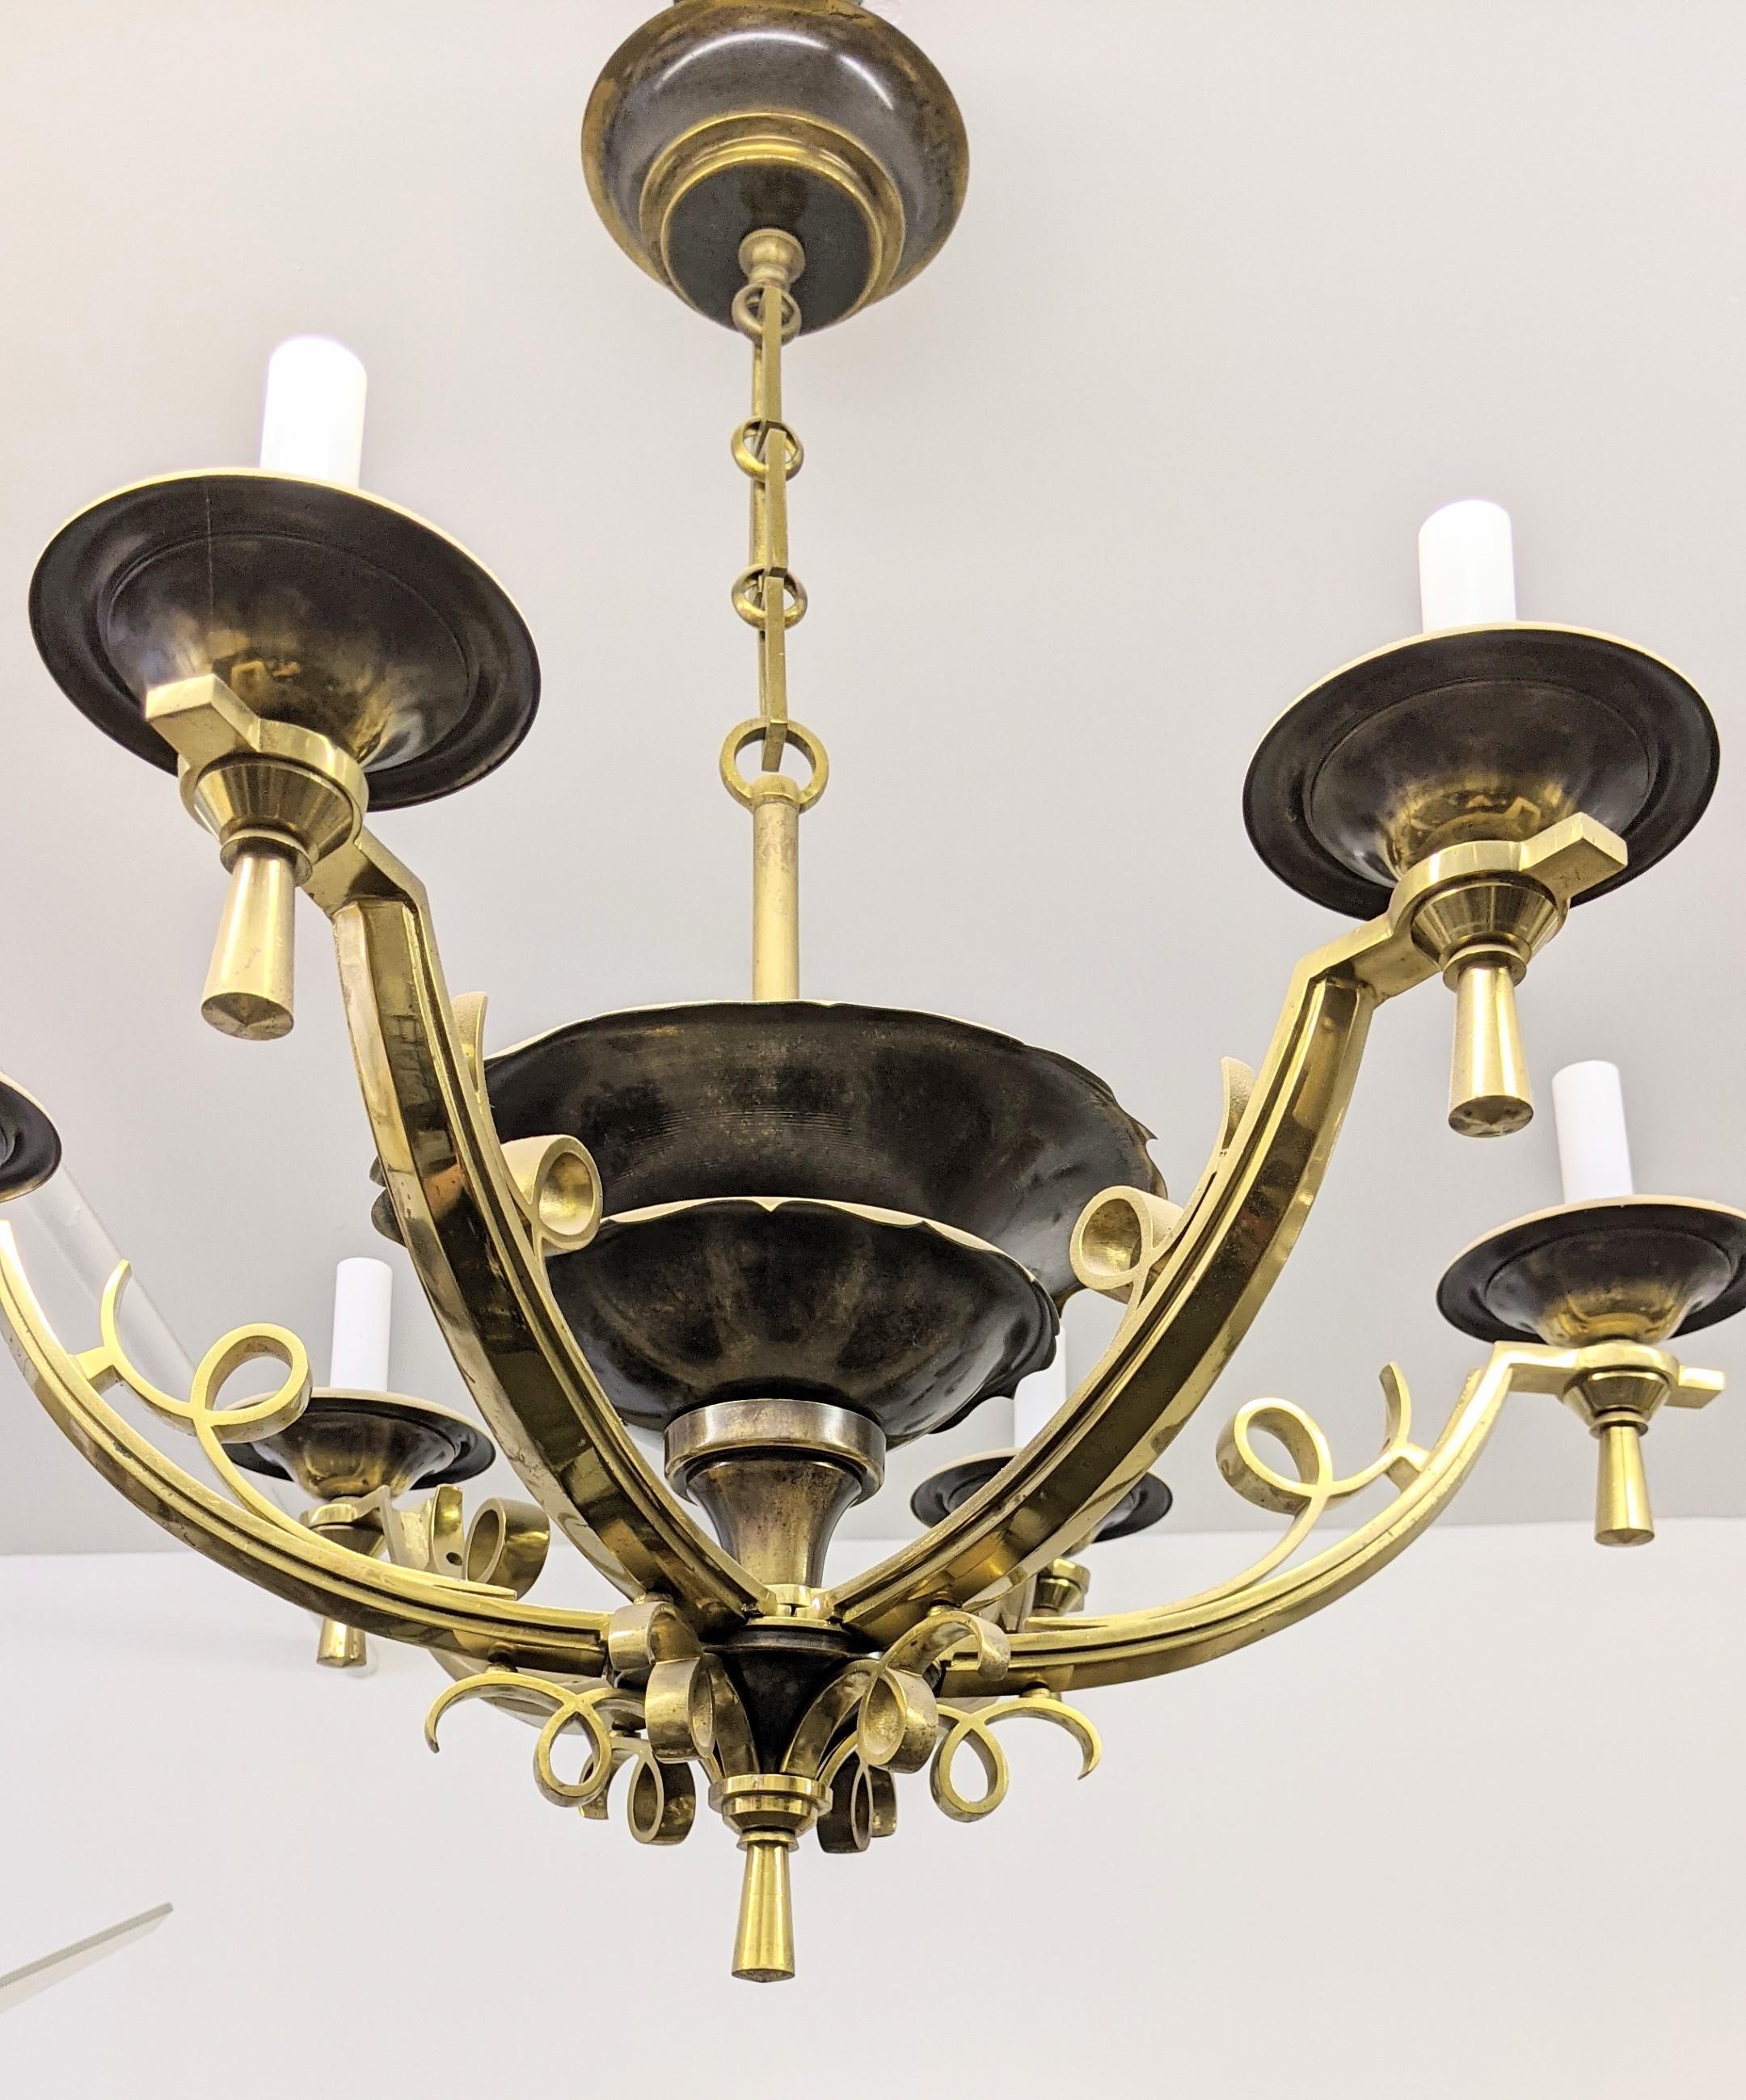 A gorgeous elegant 1940's French Art Deco polished bronze Six Arm Chandelier with black-brown patina in perfect condition, modest wear commensurate with age. Rewired to U.S. standards, accommodate candelabras bulbs, six on the arms with two